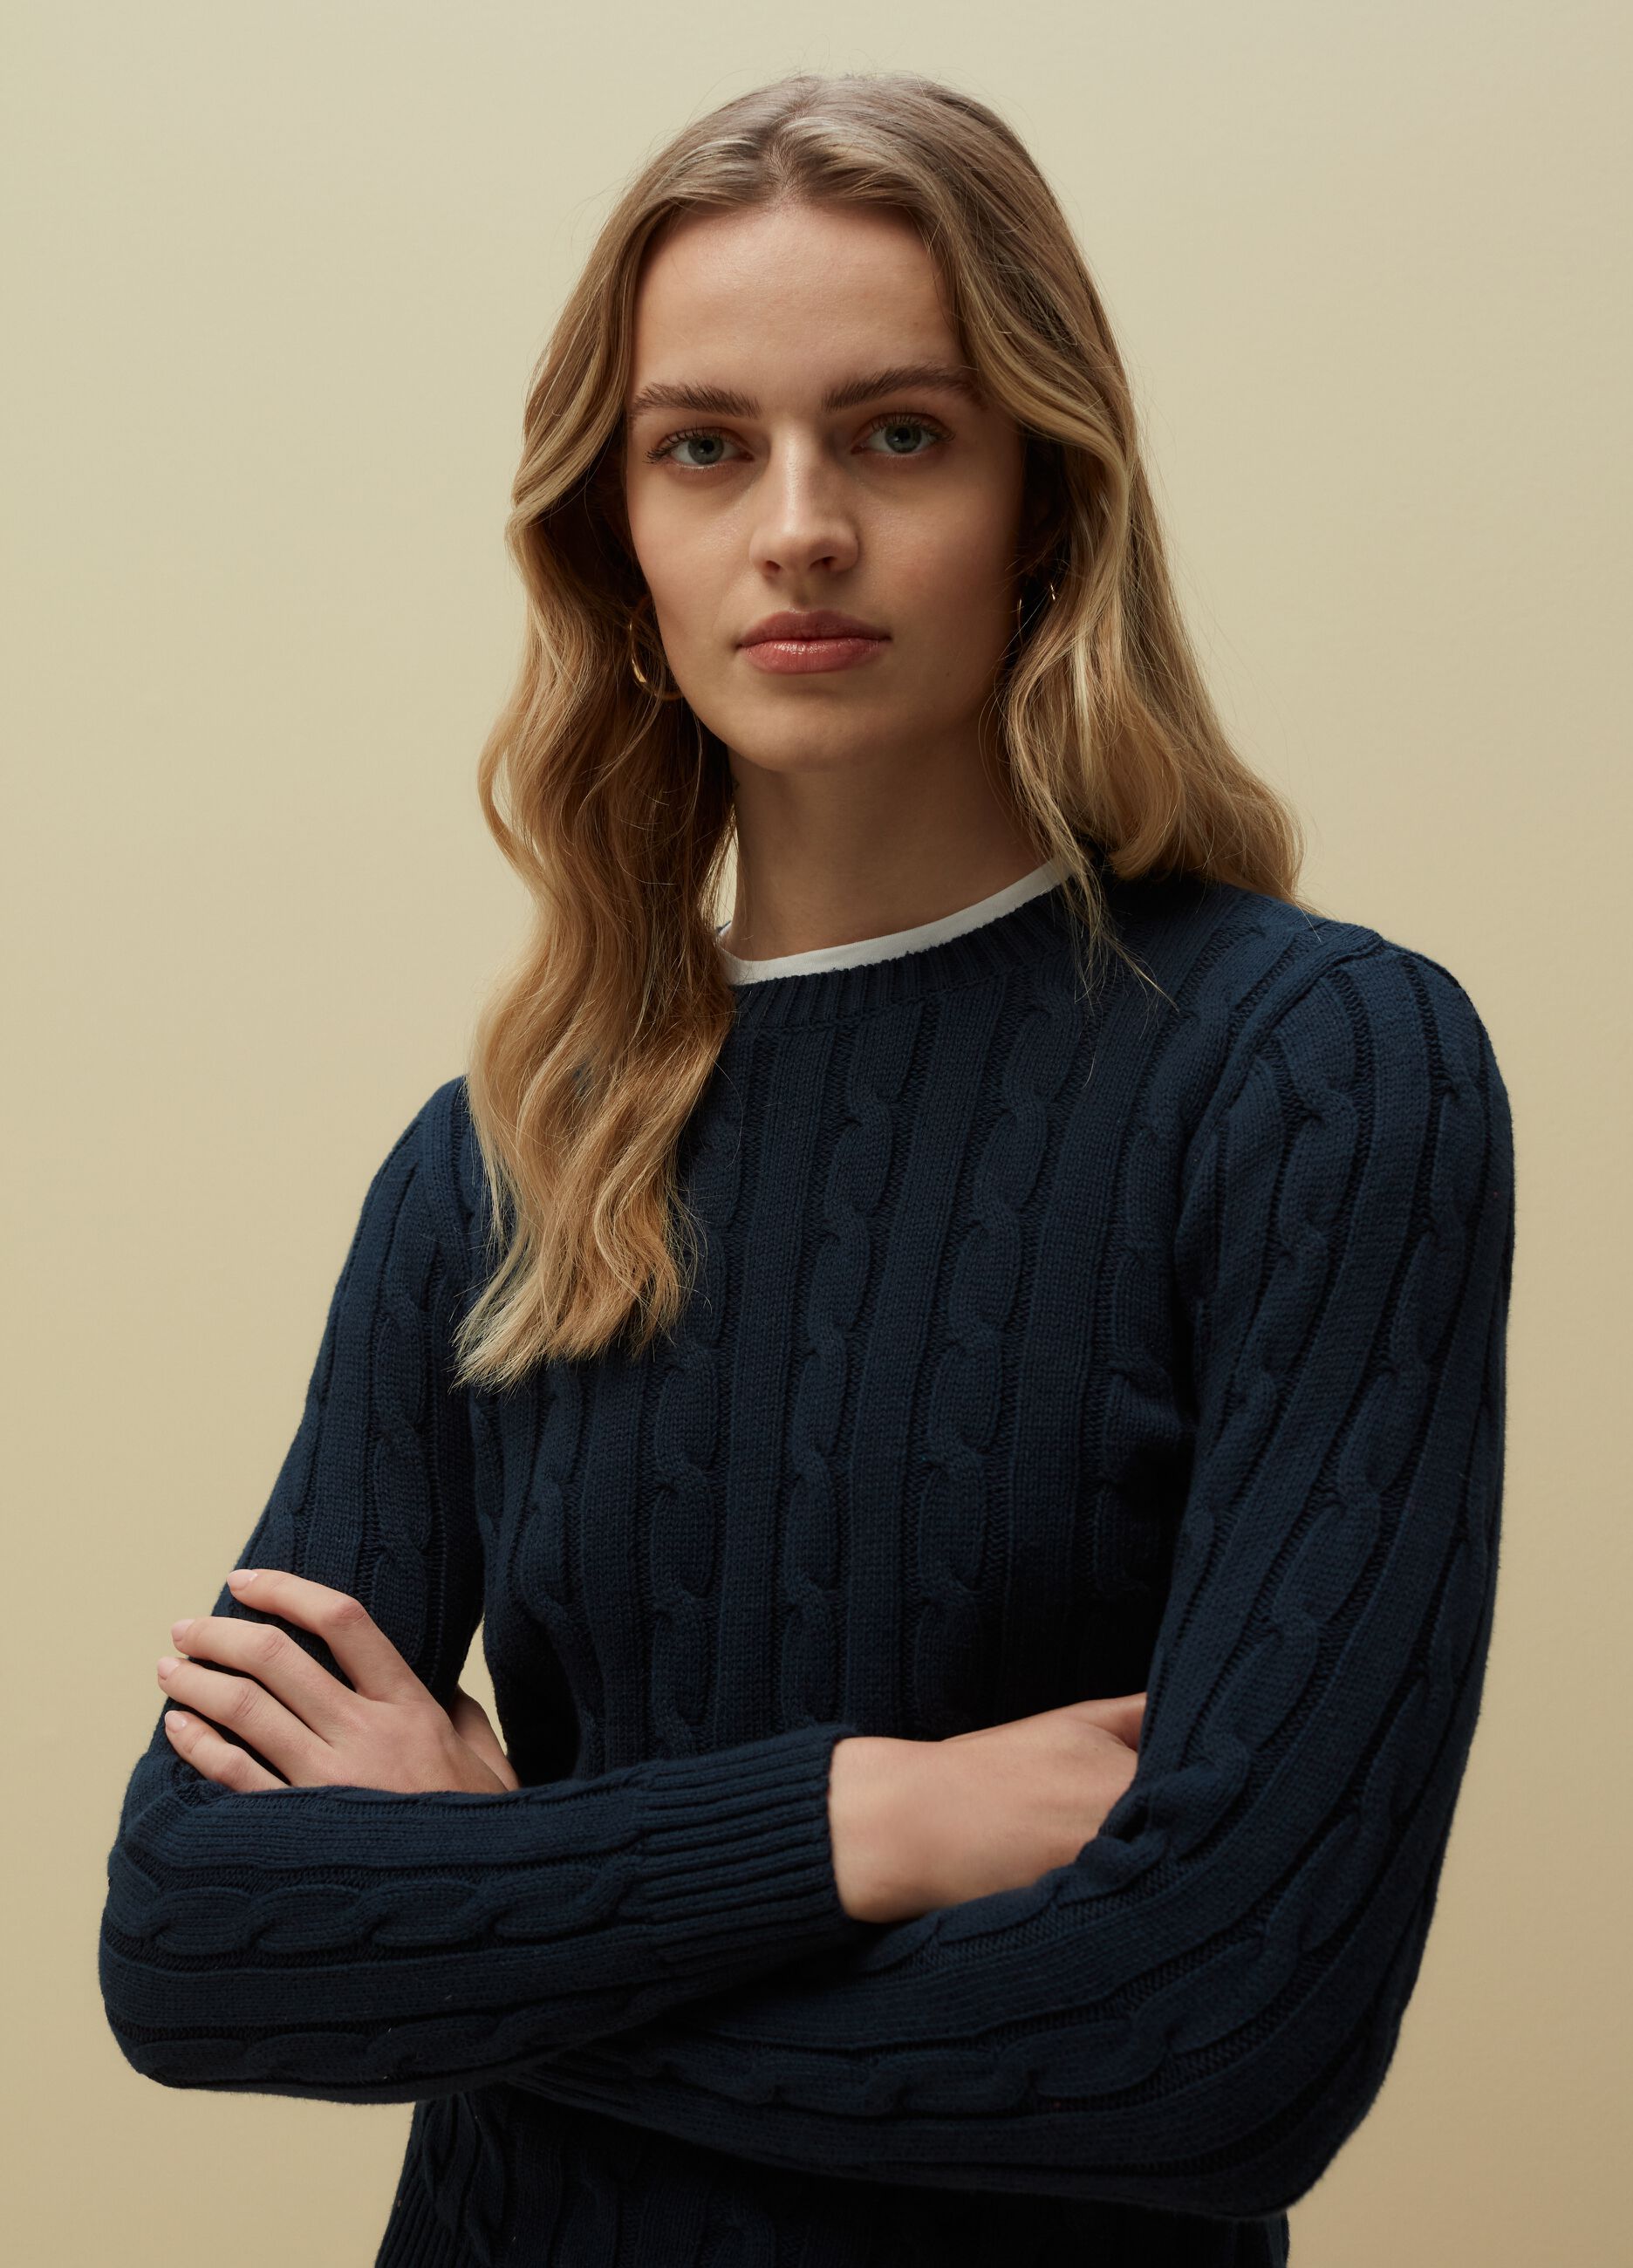 Cotton pullover with cable design